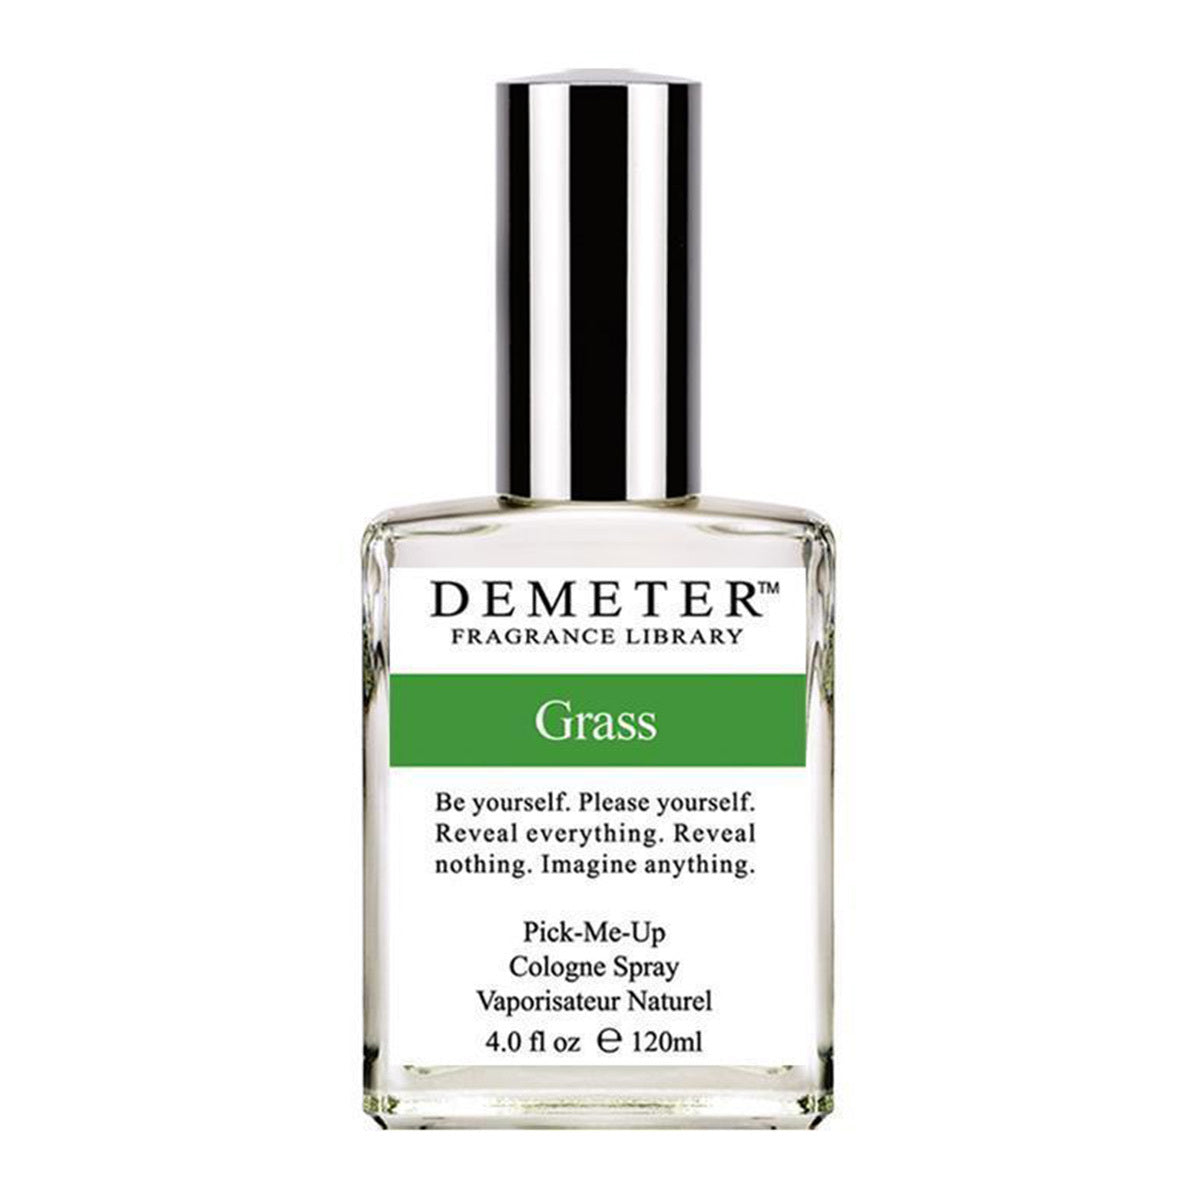 Primary image of Grass Cologne Spray